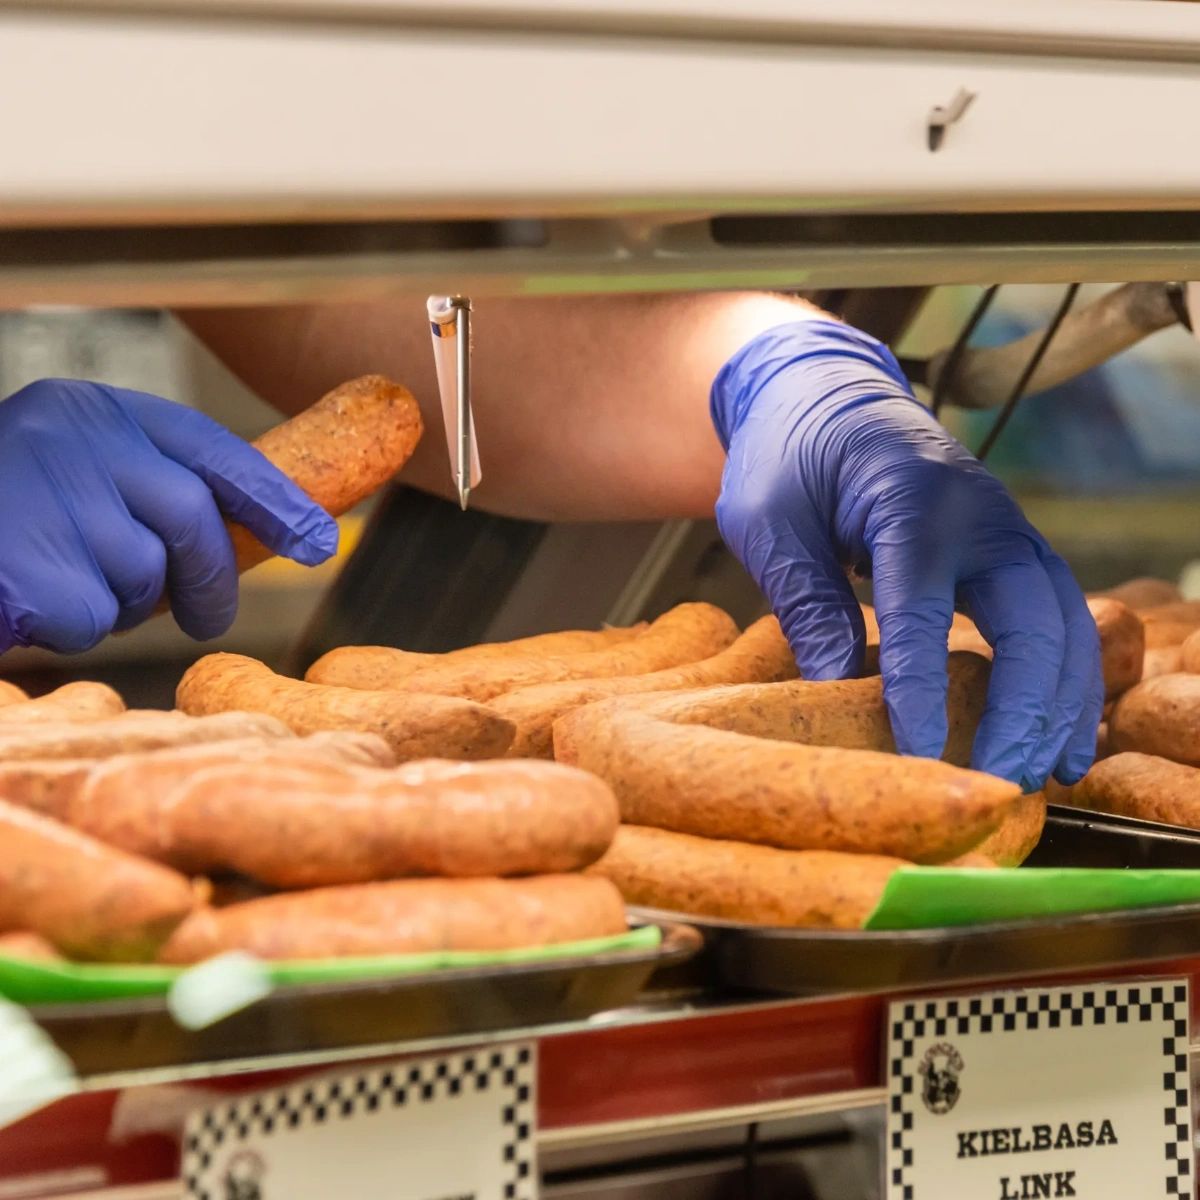 Pro tip: Don't miss out on our famous sausage on your next visit! It's made with a special blend of spices that give it its unique flavor. Trust us when we say it's a must-try! 🌭 #SlovaceksWest #FamousSausage #RealTexasFlavor